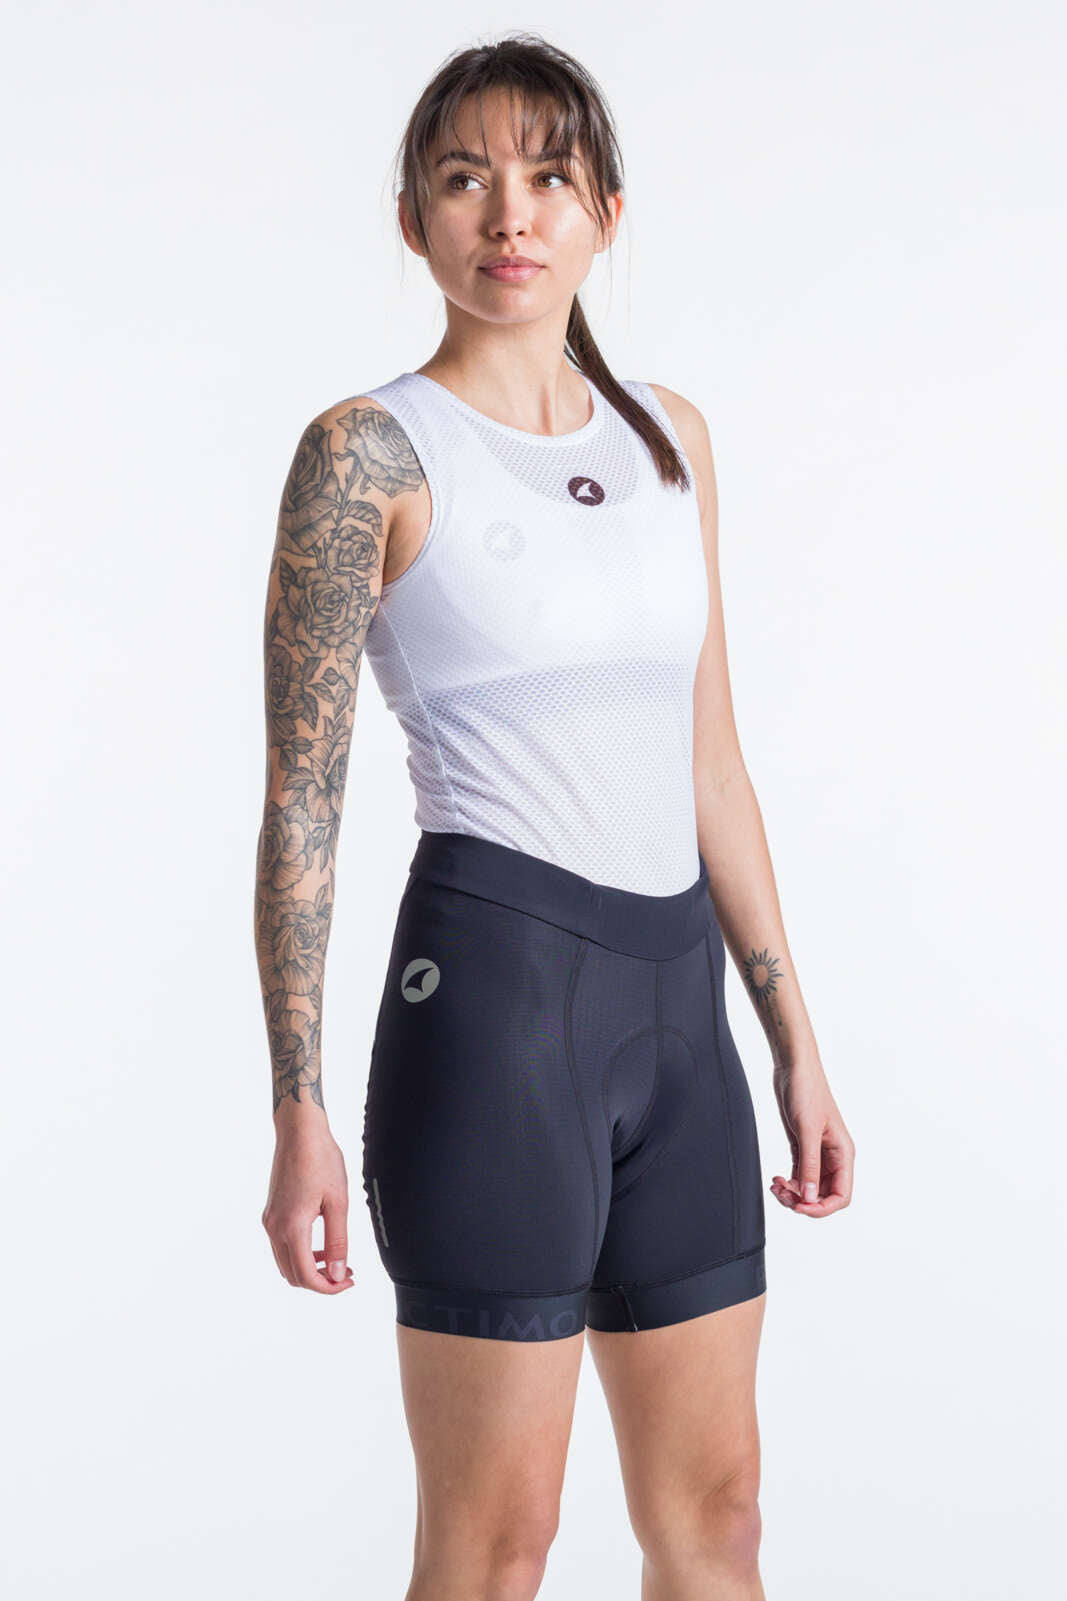 Women’s Short Cycling Shorts: Ultimate Comfort & Style